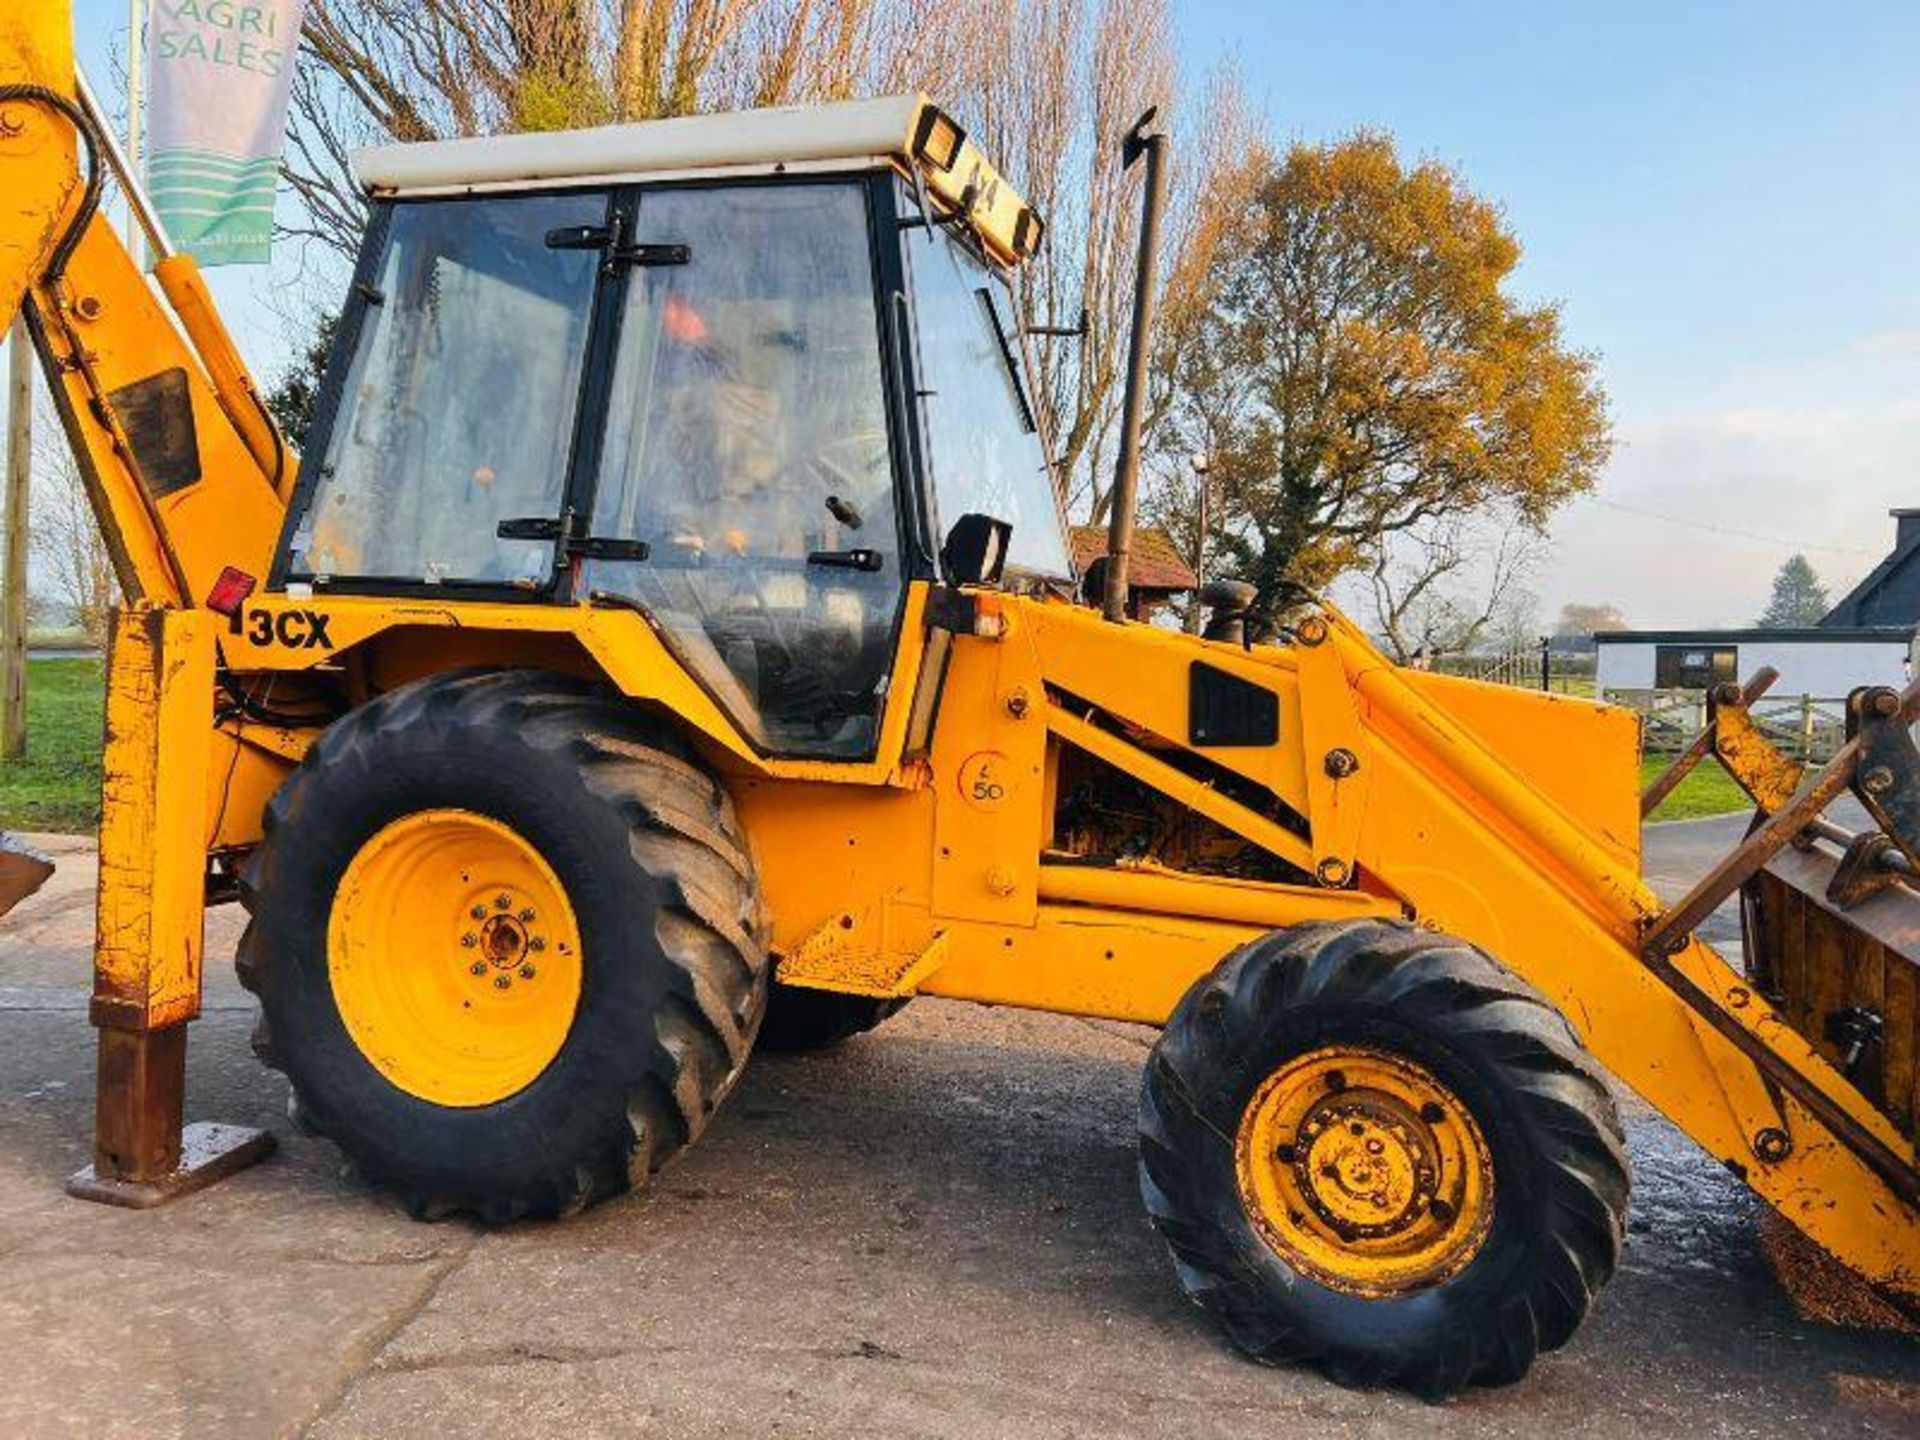 JCB 3CX PROJECT 7 4WD BACKHOE DIGGER C/W 4 X BUCKETS - Image 6 of 10